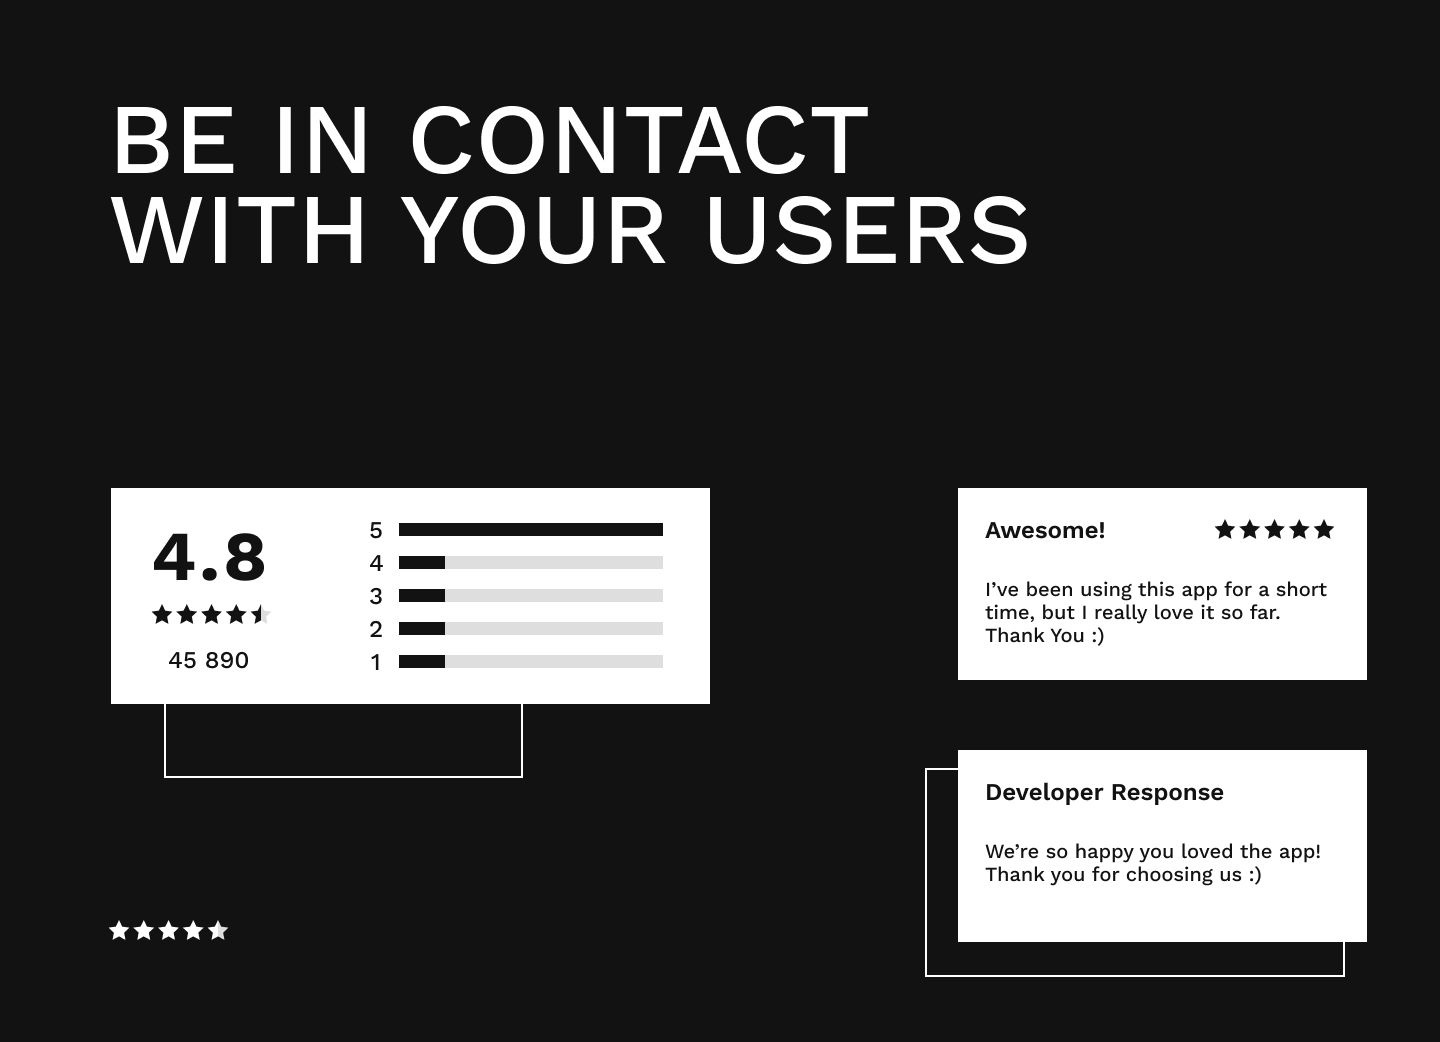 Be in contact with your users